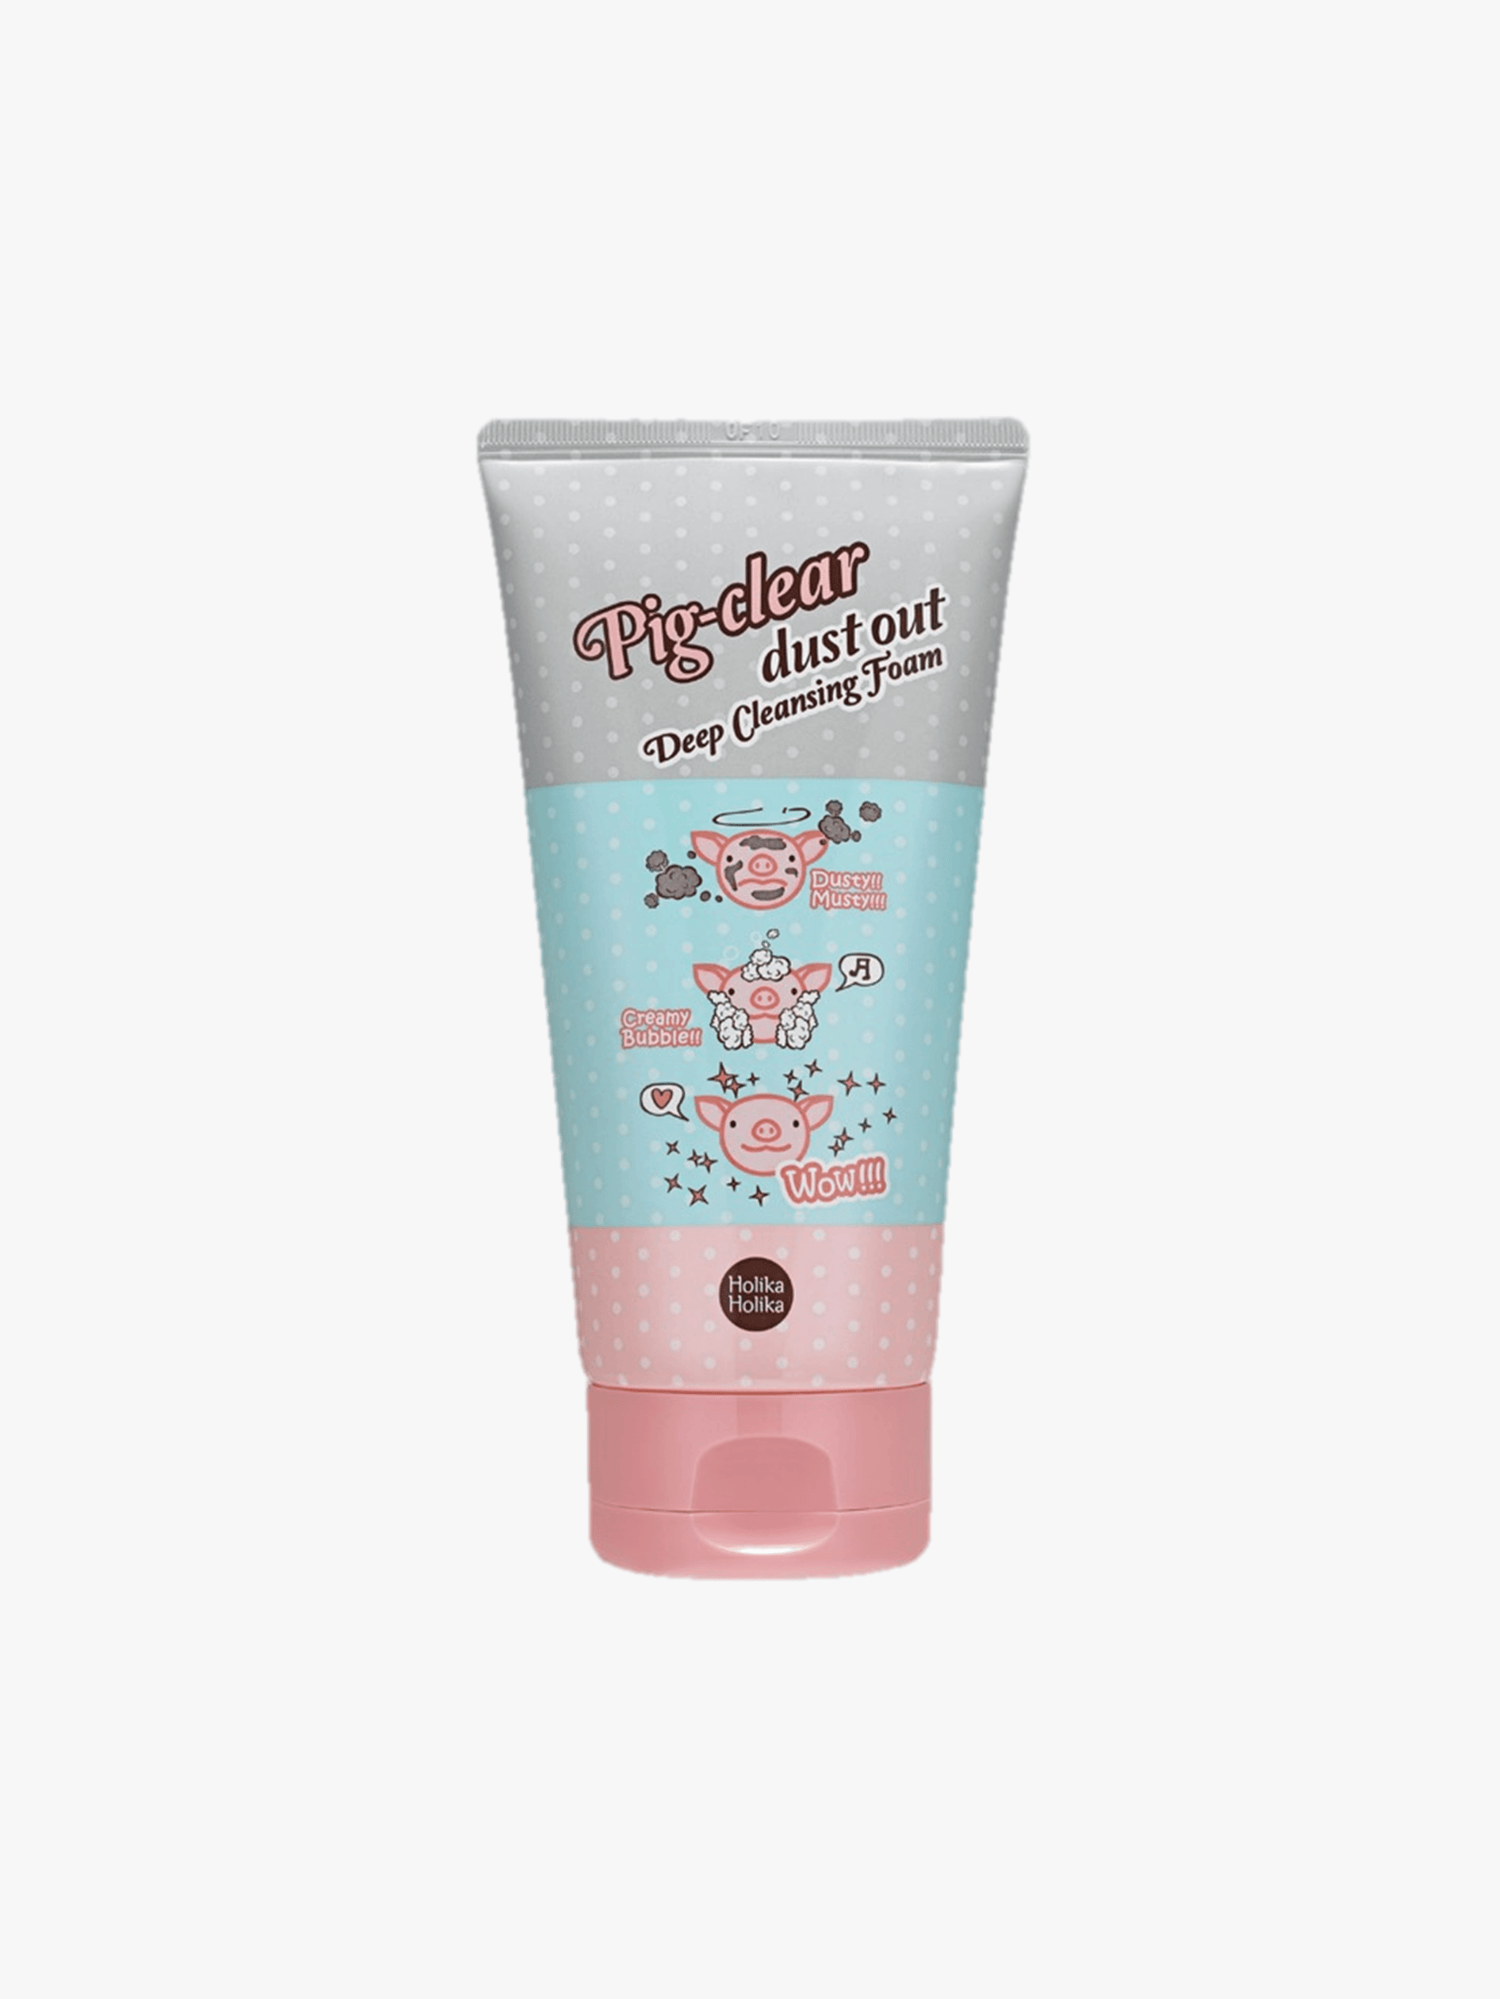 Holika Holika - Cleanser - Pig Clear Dust Out Deep Cleansing Foam